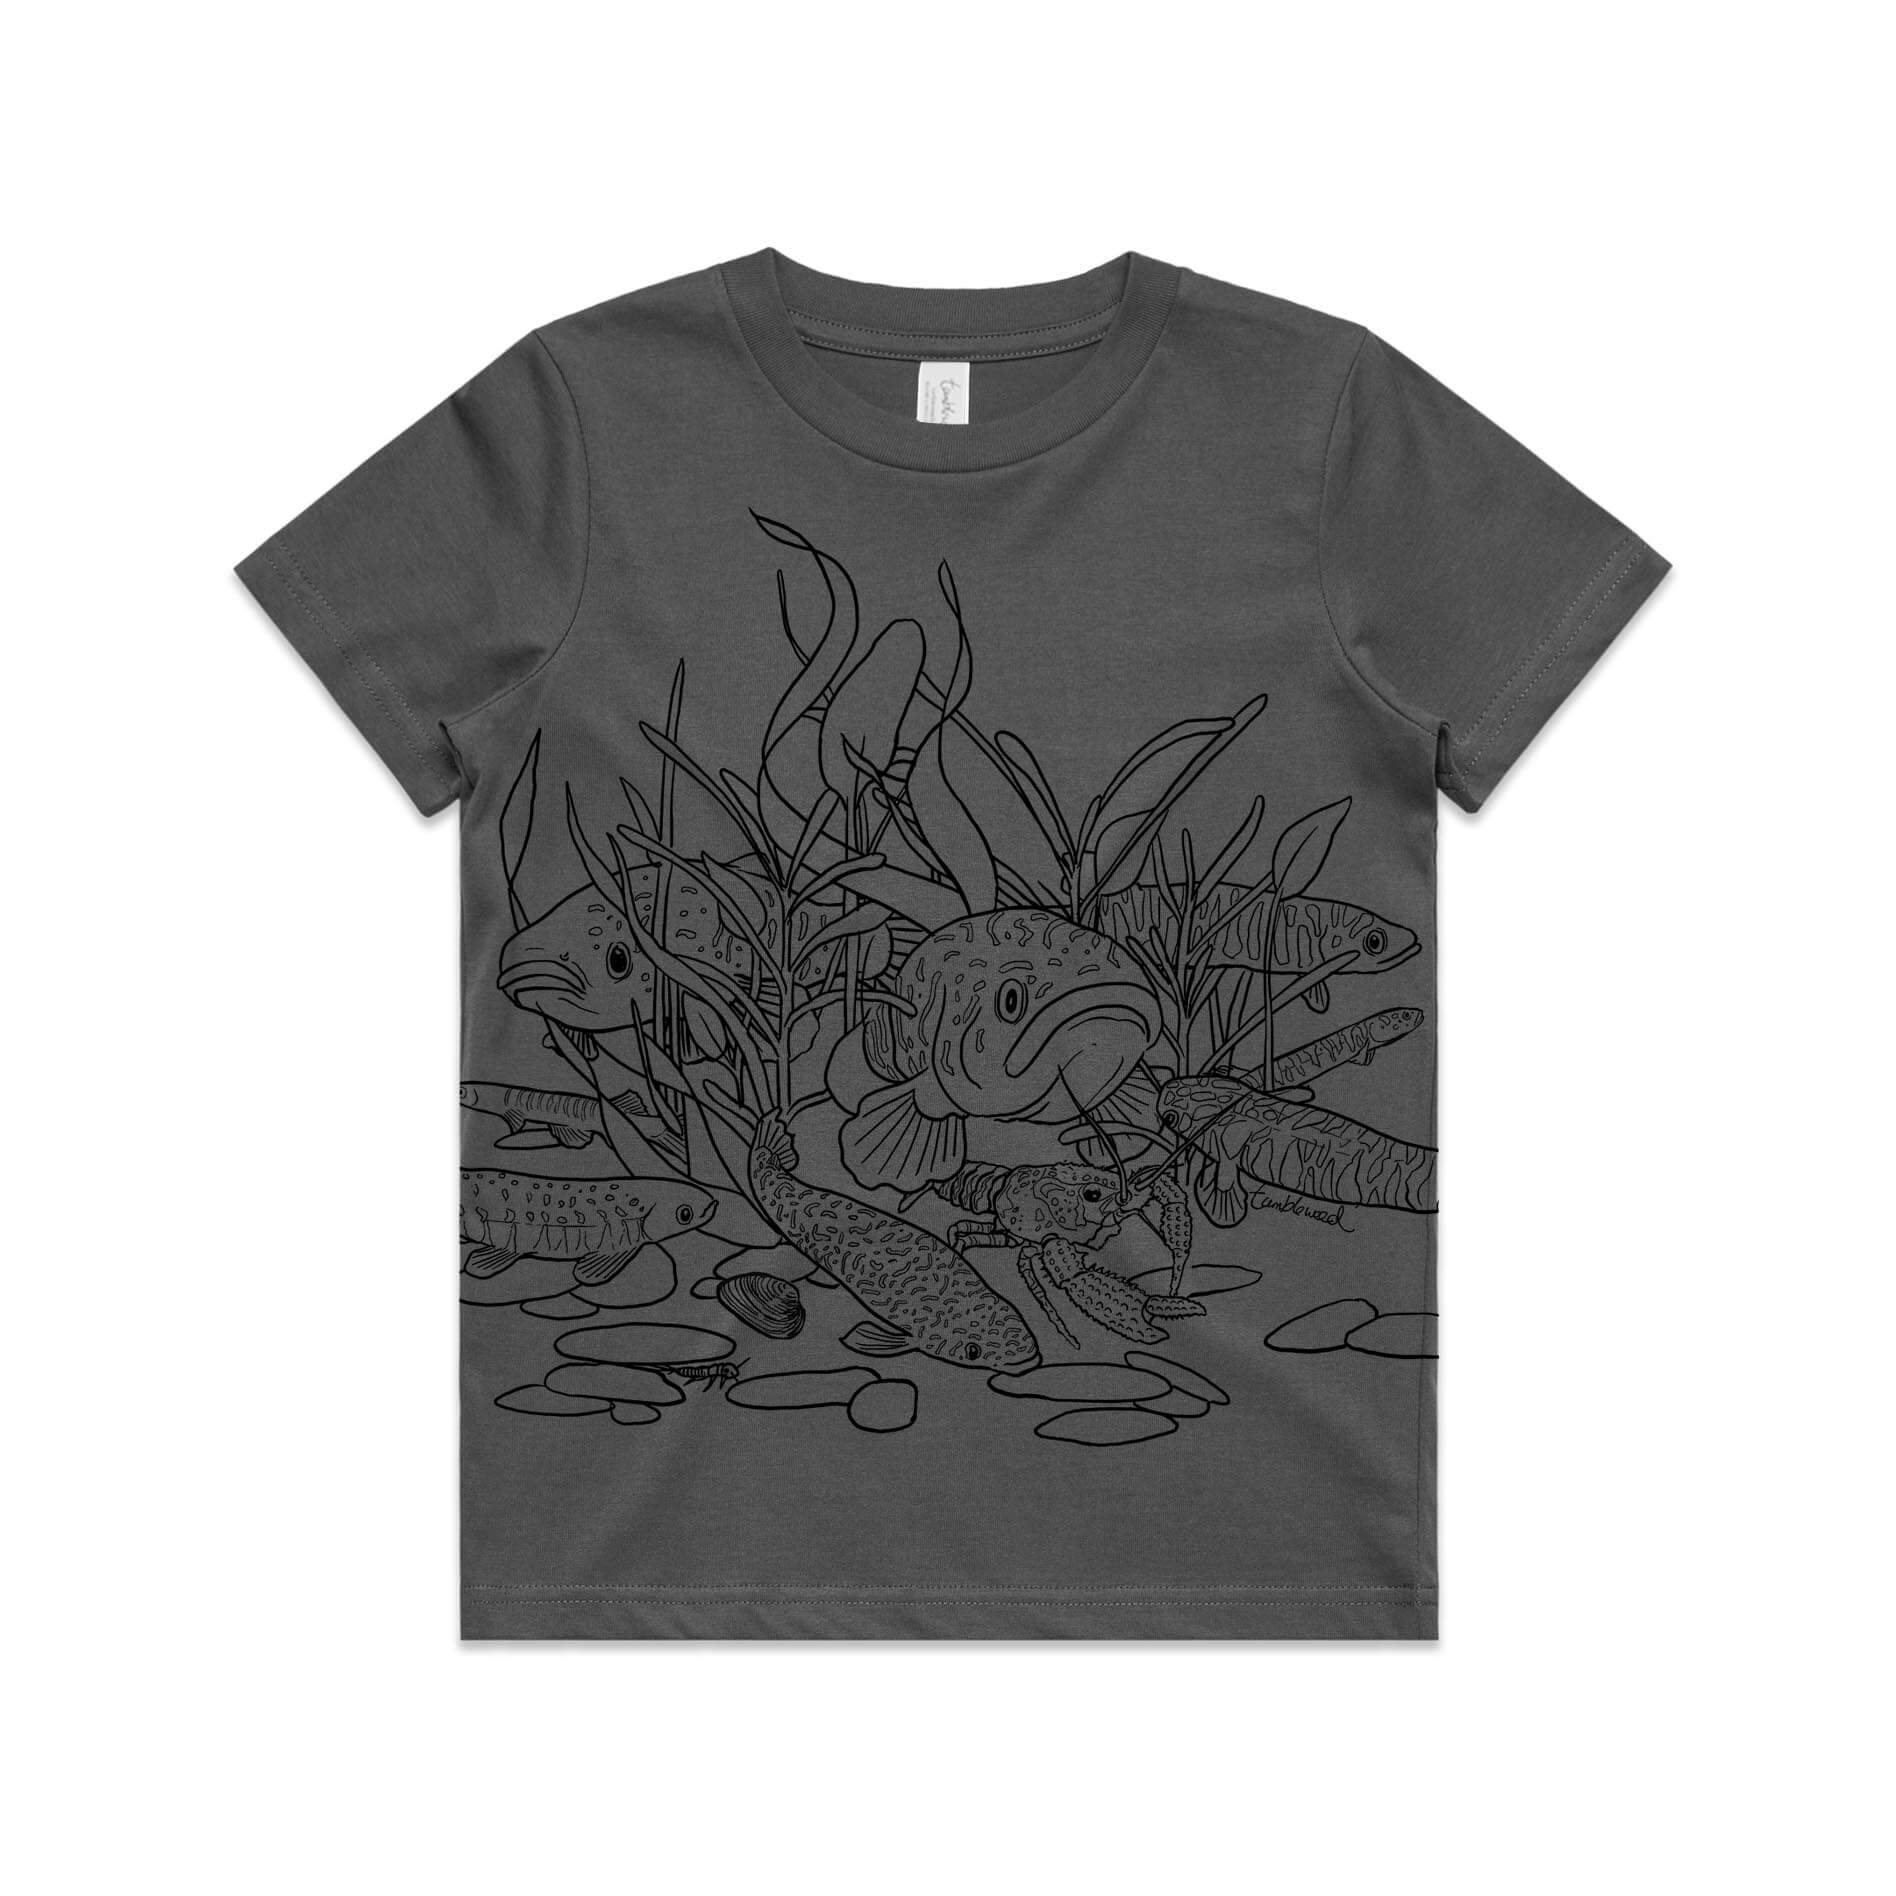 Charcoal, cotton kids' t-shirt with screen printed freshwater fish design.